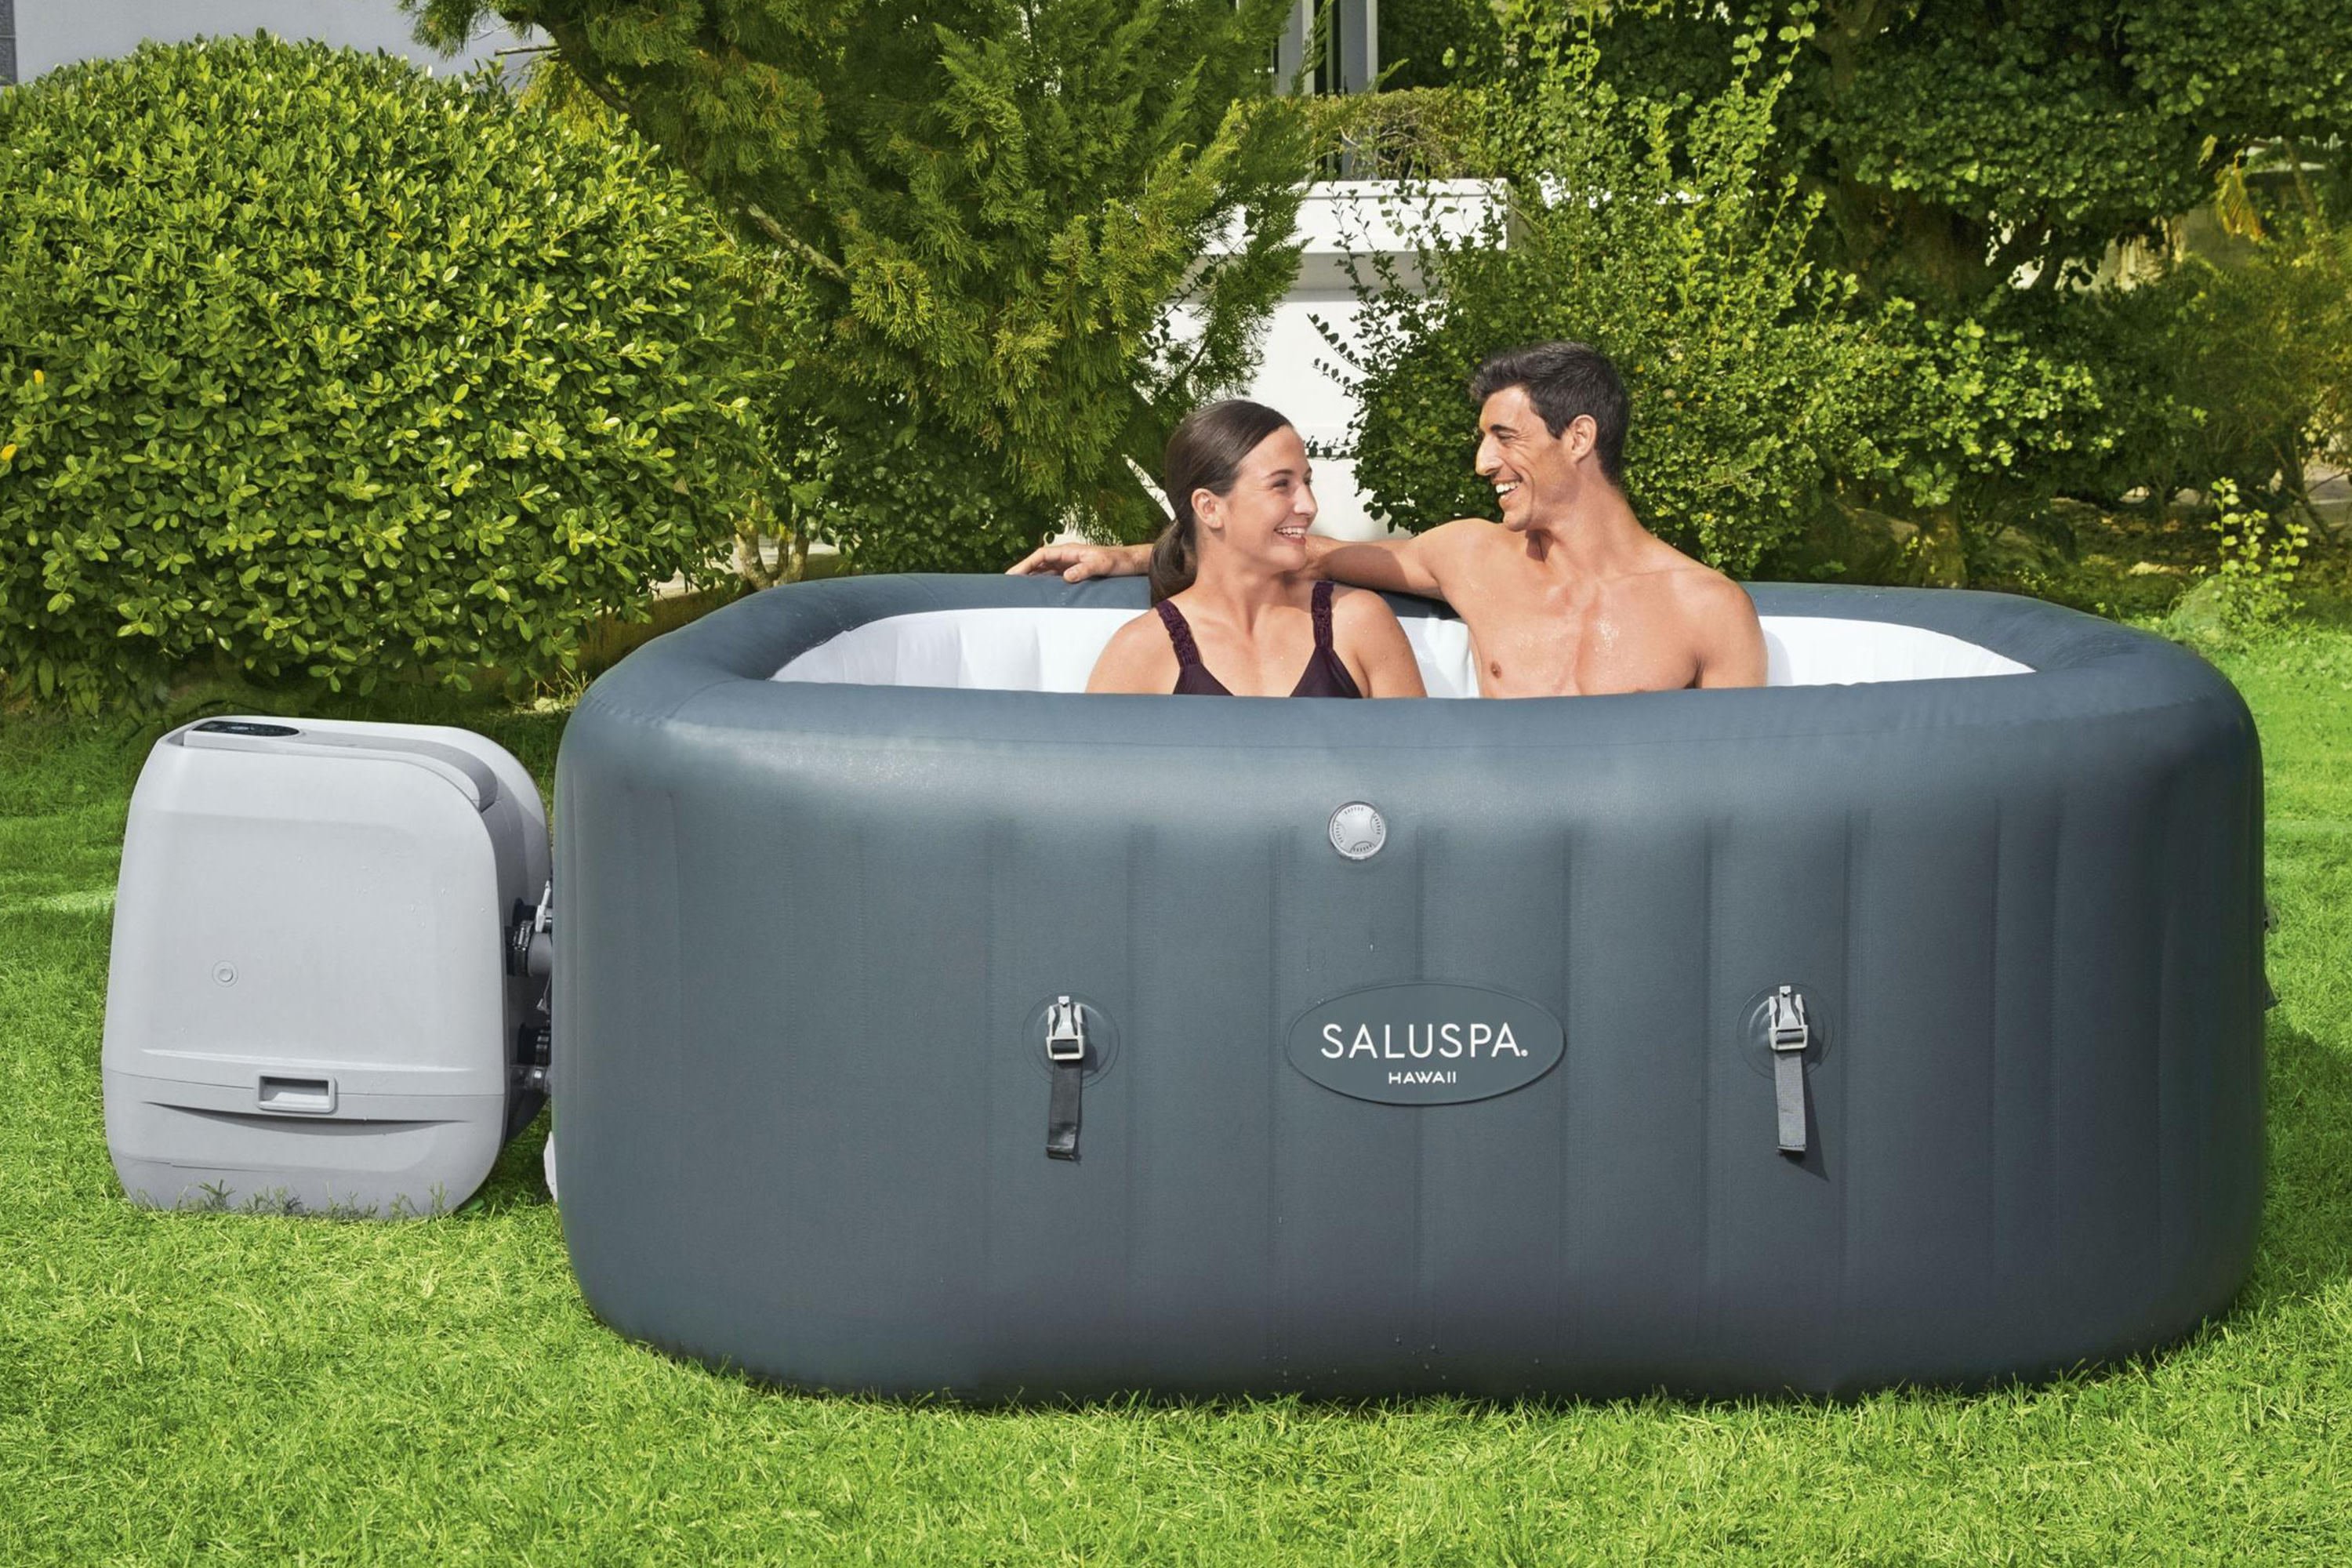 SaluSpa Hawaii HydroJet Pro Inflatable Hot Tub Spa 4-6 Person - image 5 of 9